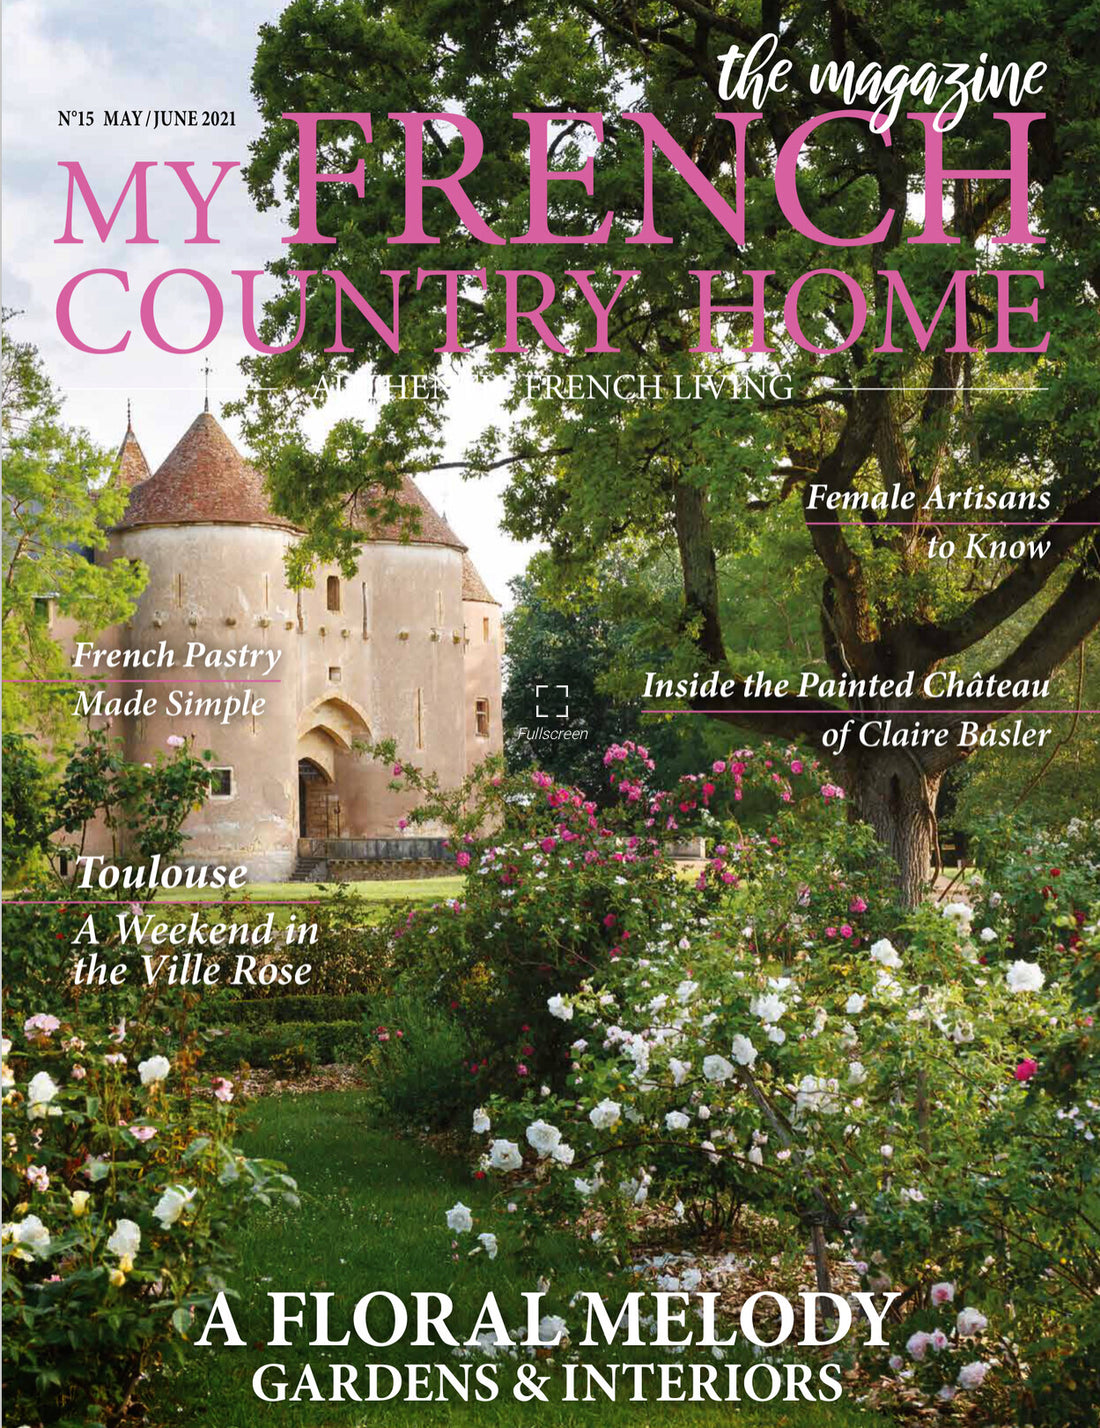 May/June issue of My French Country Home Magazine has arrived!